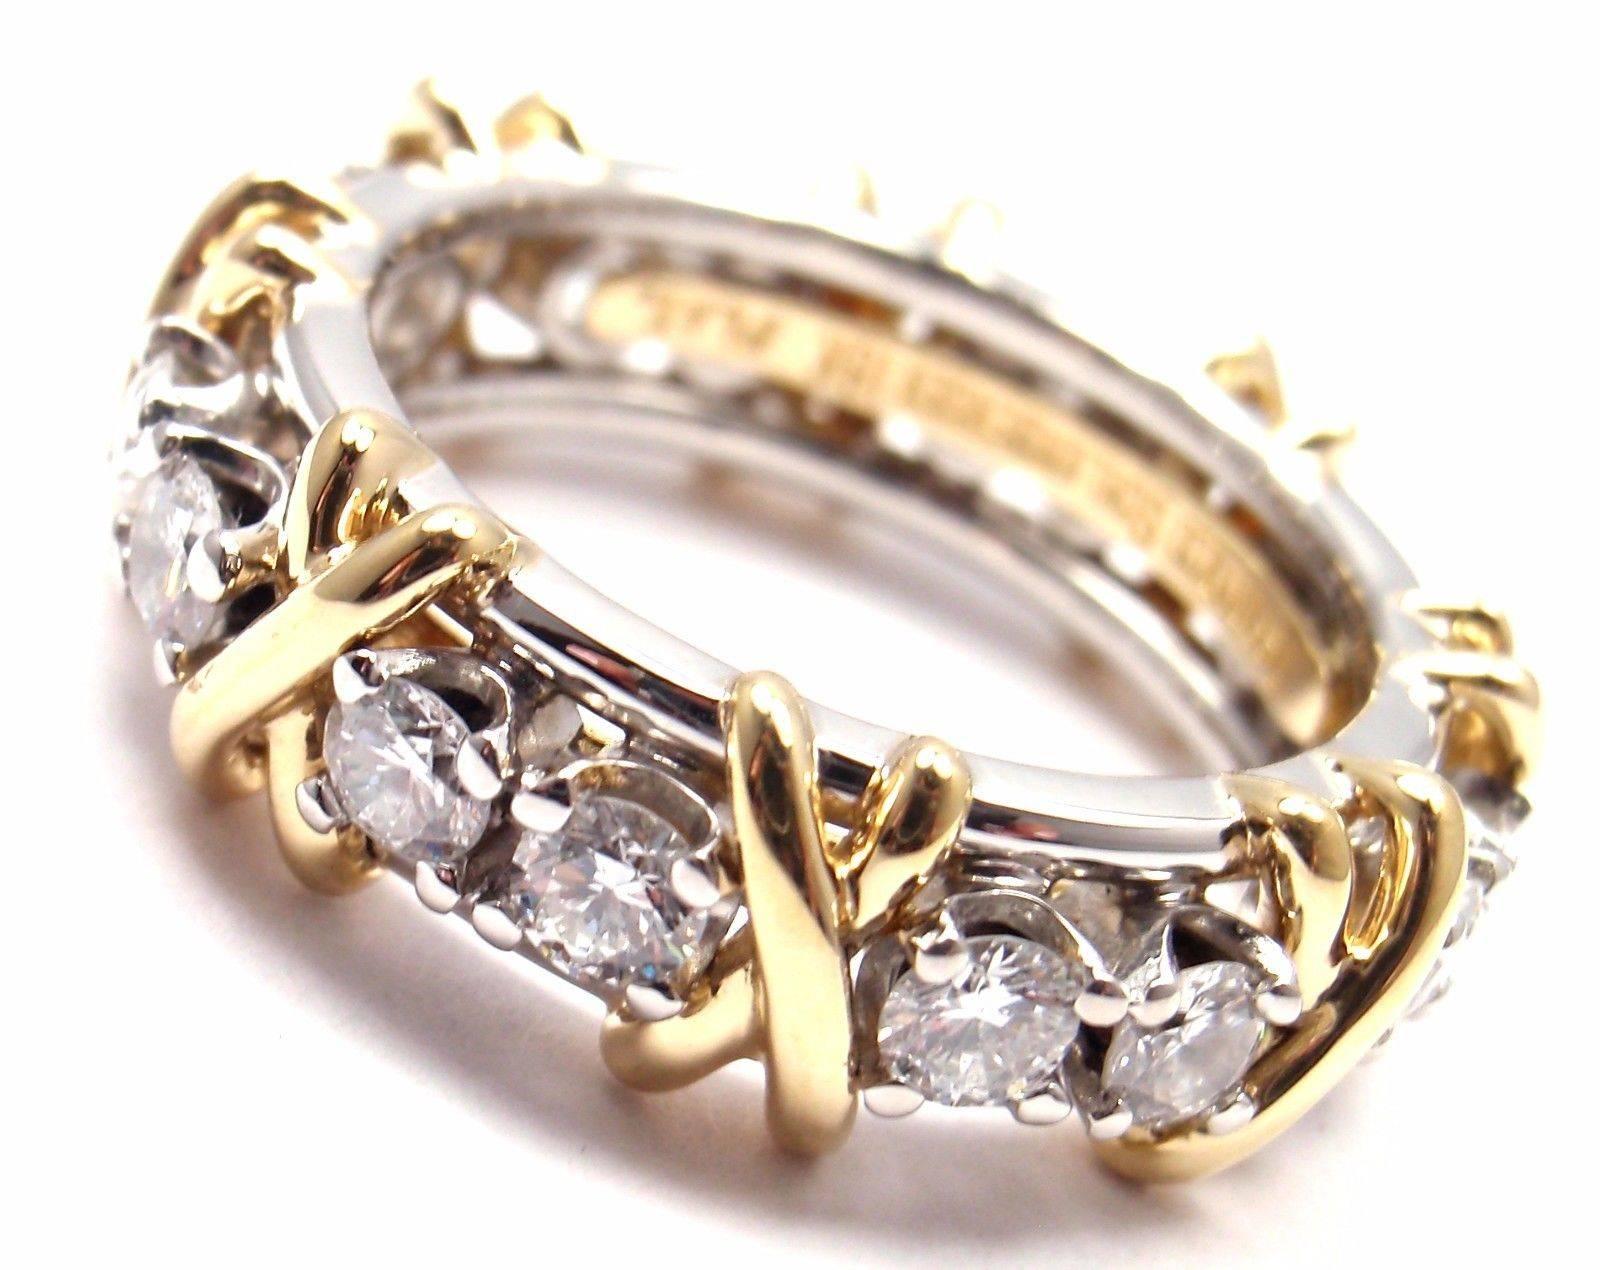 18k Yellow Gold & Platinum Diamond Jean Schlumberger Band Ring designed for Tiffany & Co. 

With 16 Round Brilliant Cut Diamonds VS1 clarity, G color, Total weight Approx 1.14ct
This ring comes with Tiffany & Co box.

Details:
Ring Size: